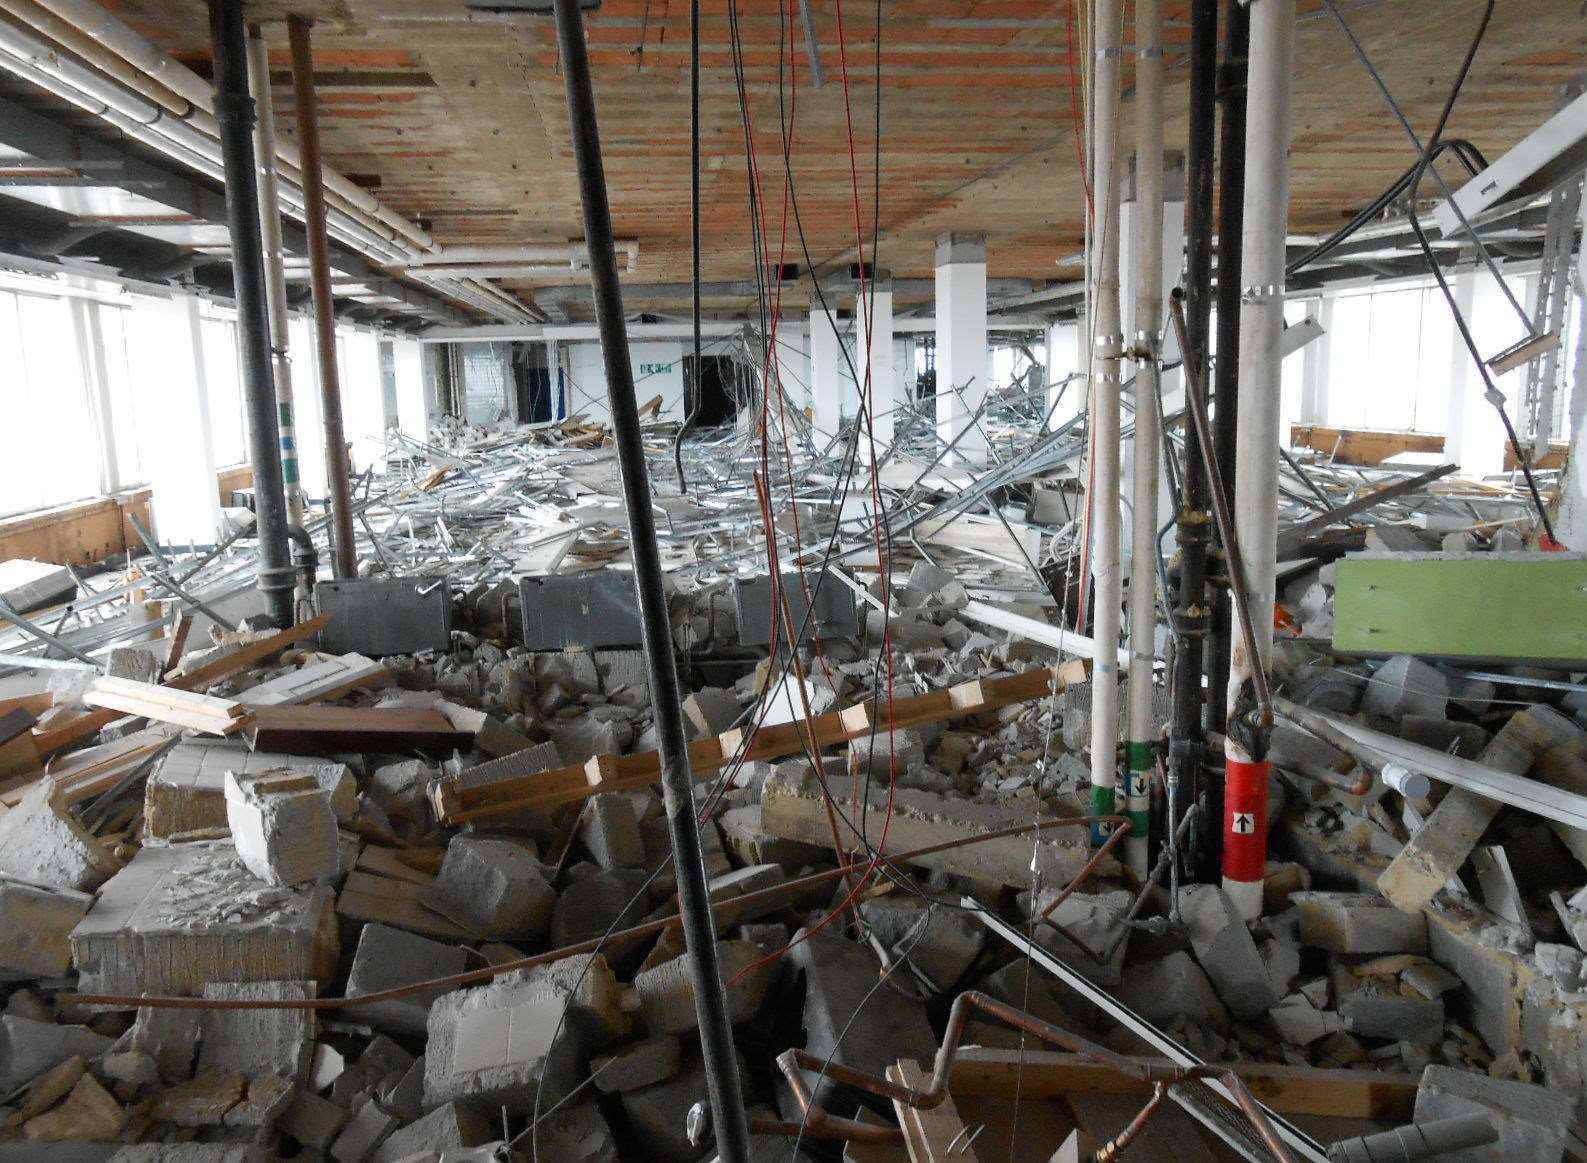 The asbestos "war zone" which greeted HSE inspectors at the Panorama building in Ashford